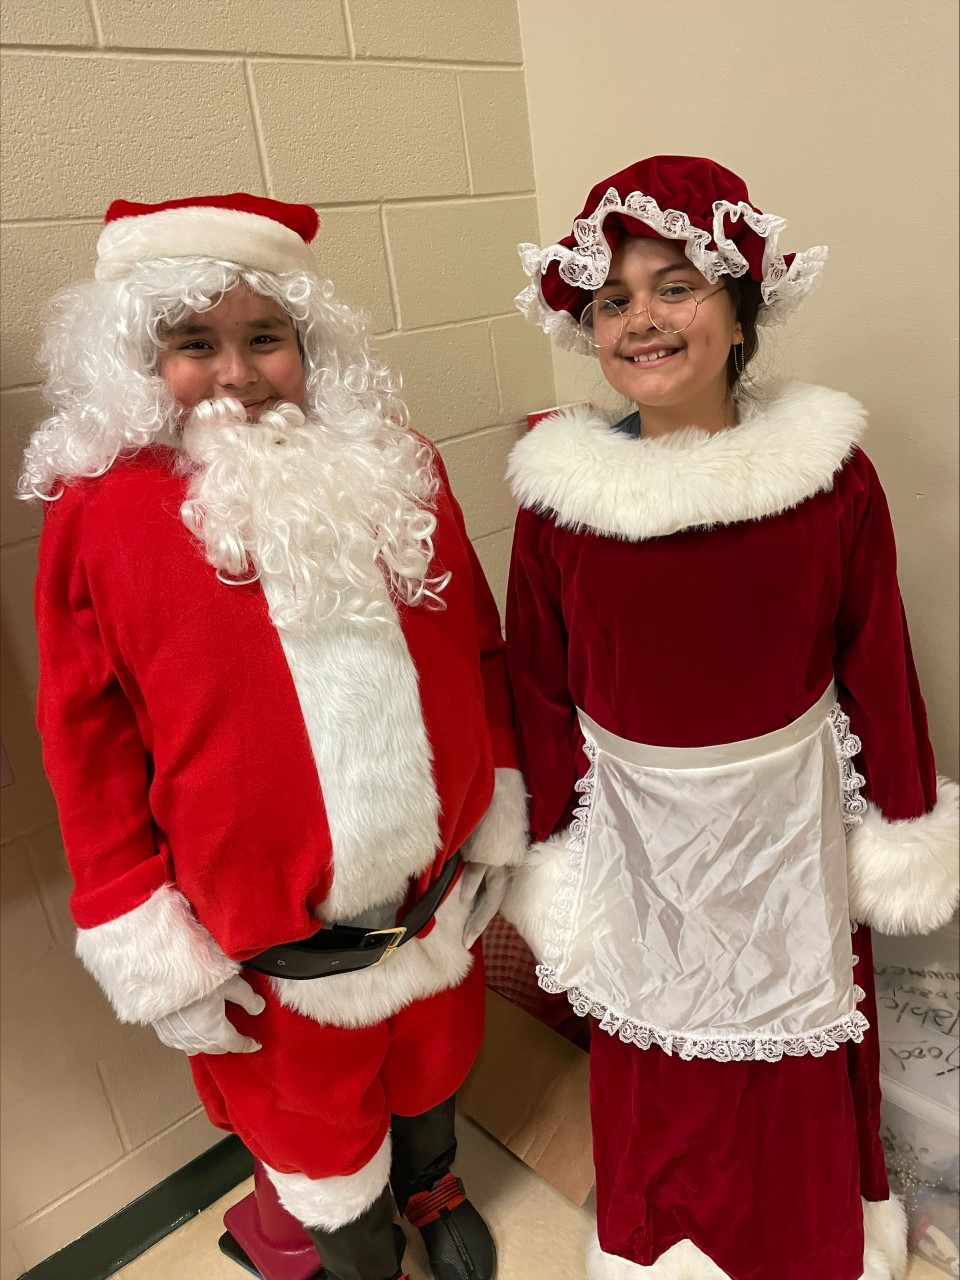 elementary aged boy and girl dressed as Mr. and Mrs. Claus